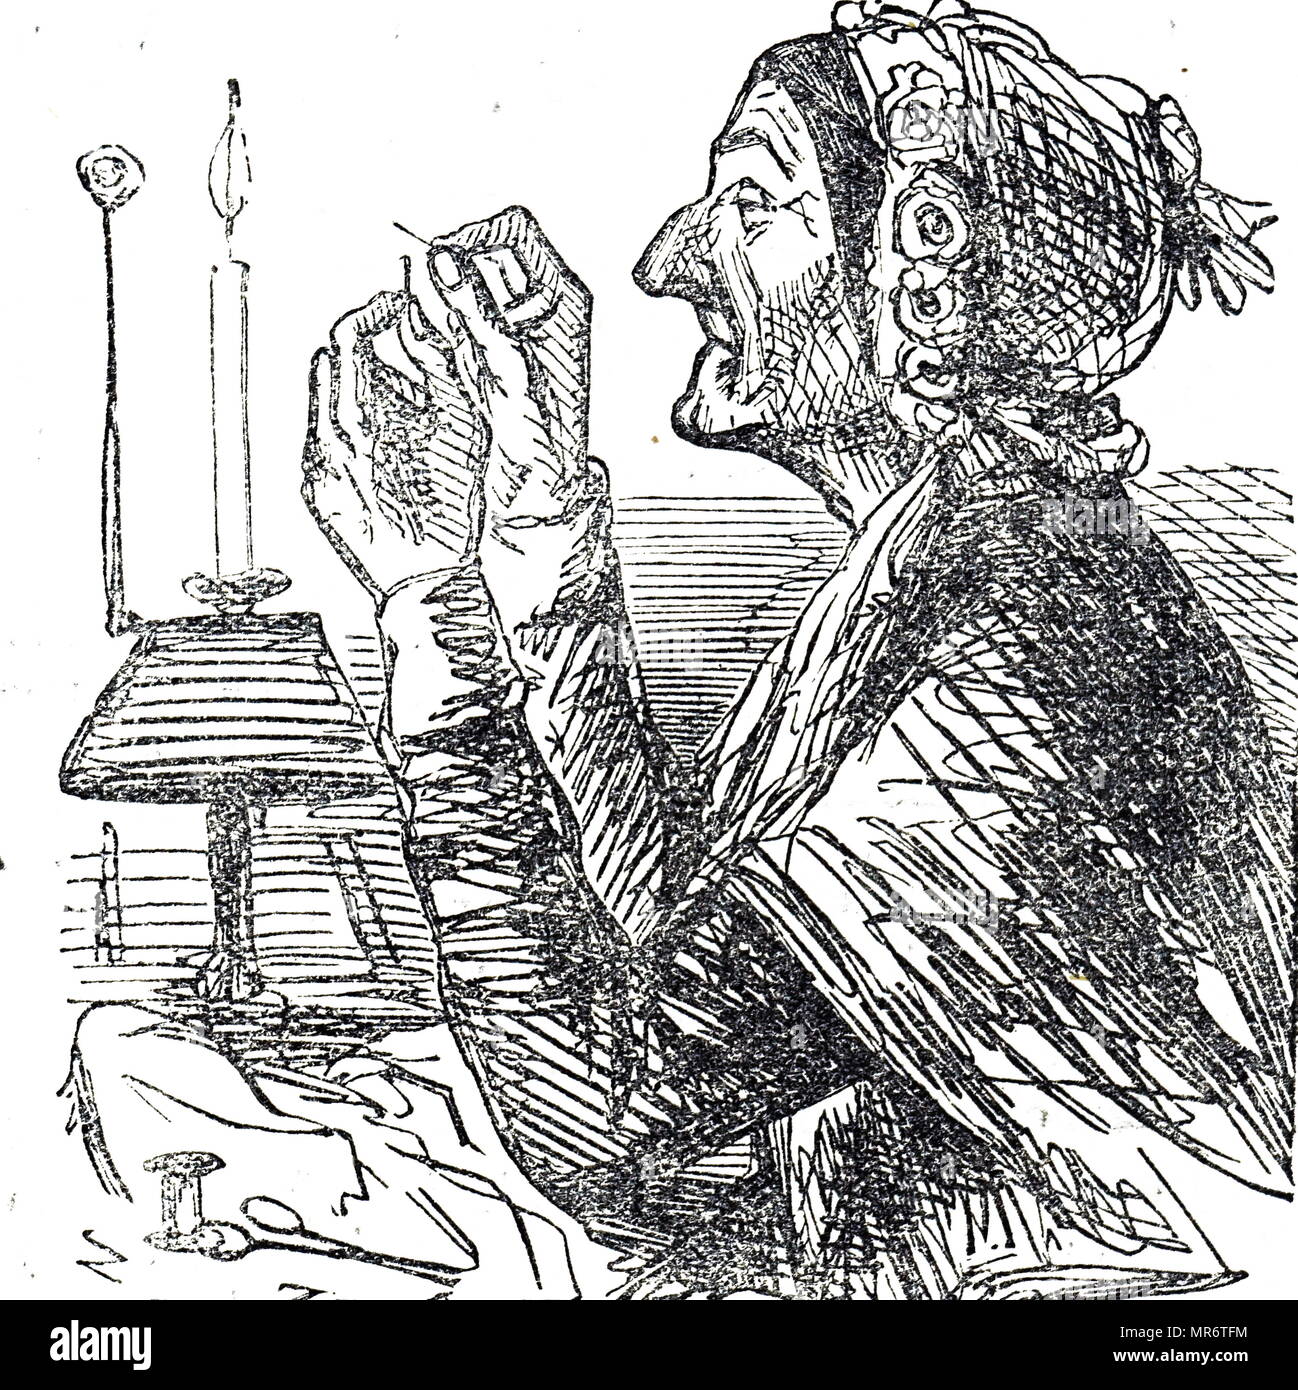 Cartoon depicting an old lady having difficulty threading a sewing needle. Dated 19th century Stock Photo